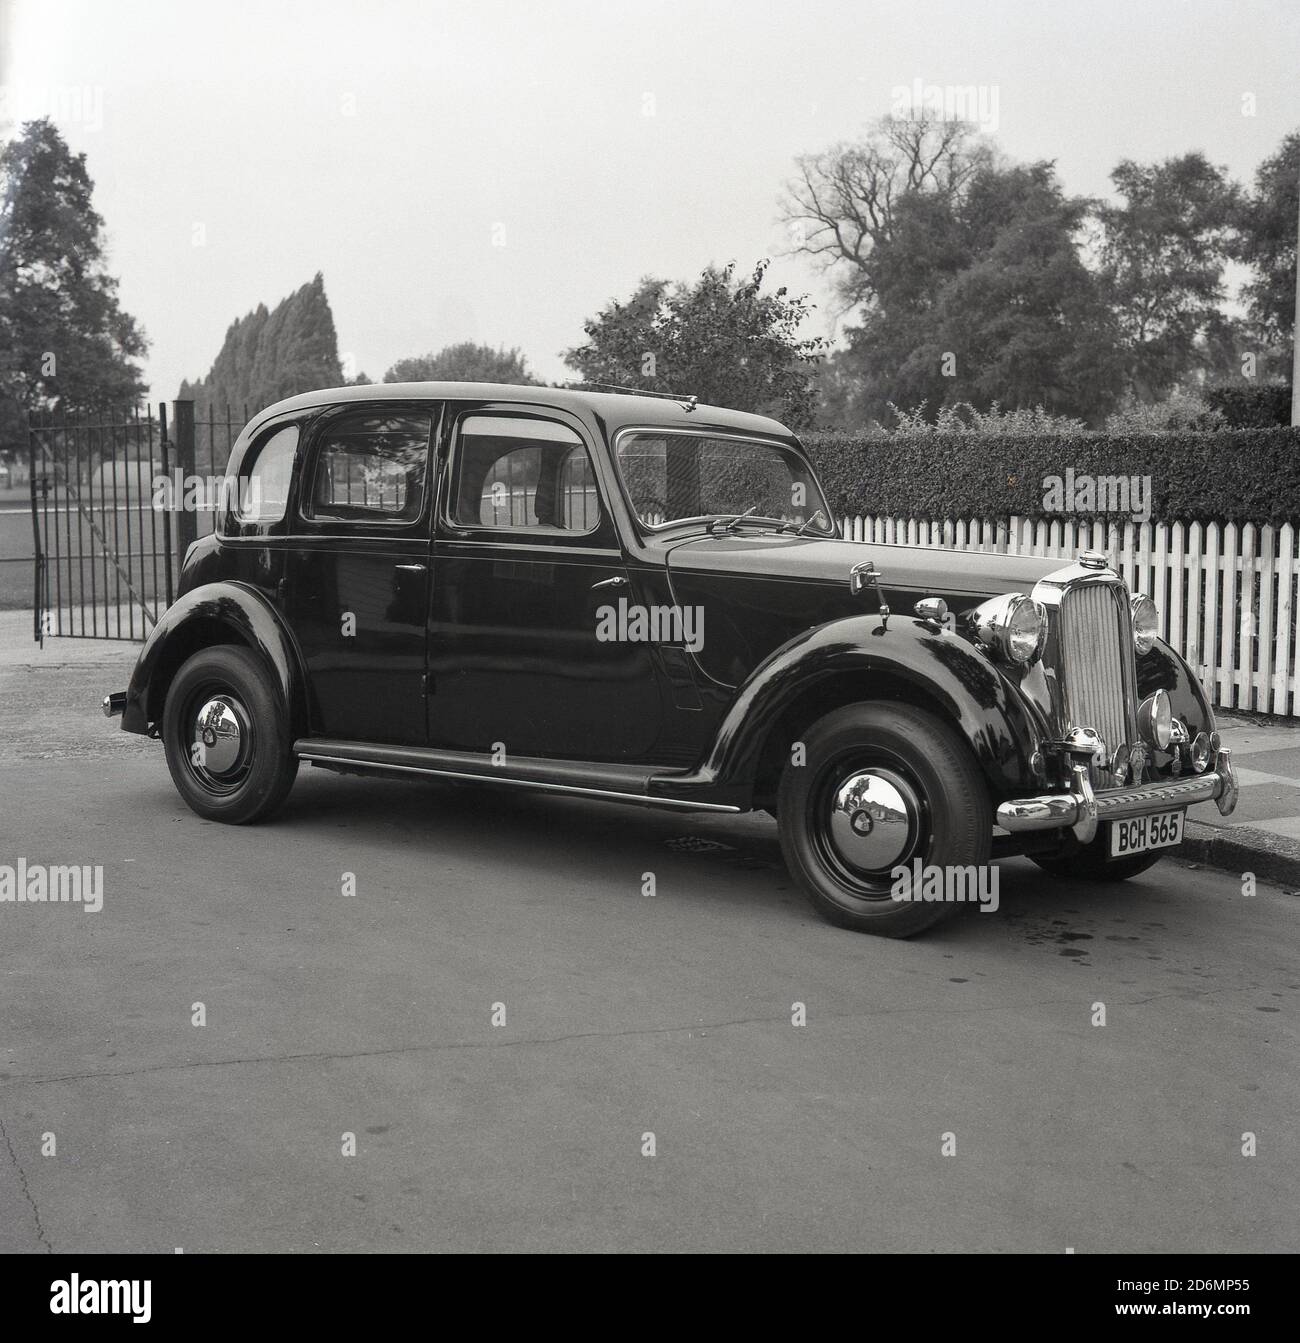 1960s, historical, an elegant Rover 16 motorcar parked at an entrance to a suburban park, South London, England, UK.  A four-door saloon with a top speed of 77 mph, British made and built between 1937 and 1940. Stock Photo